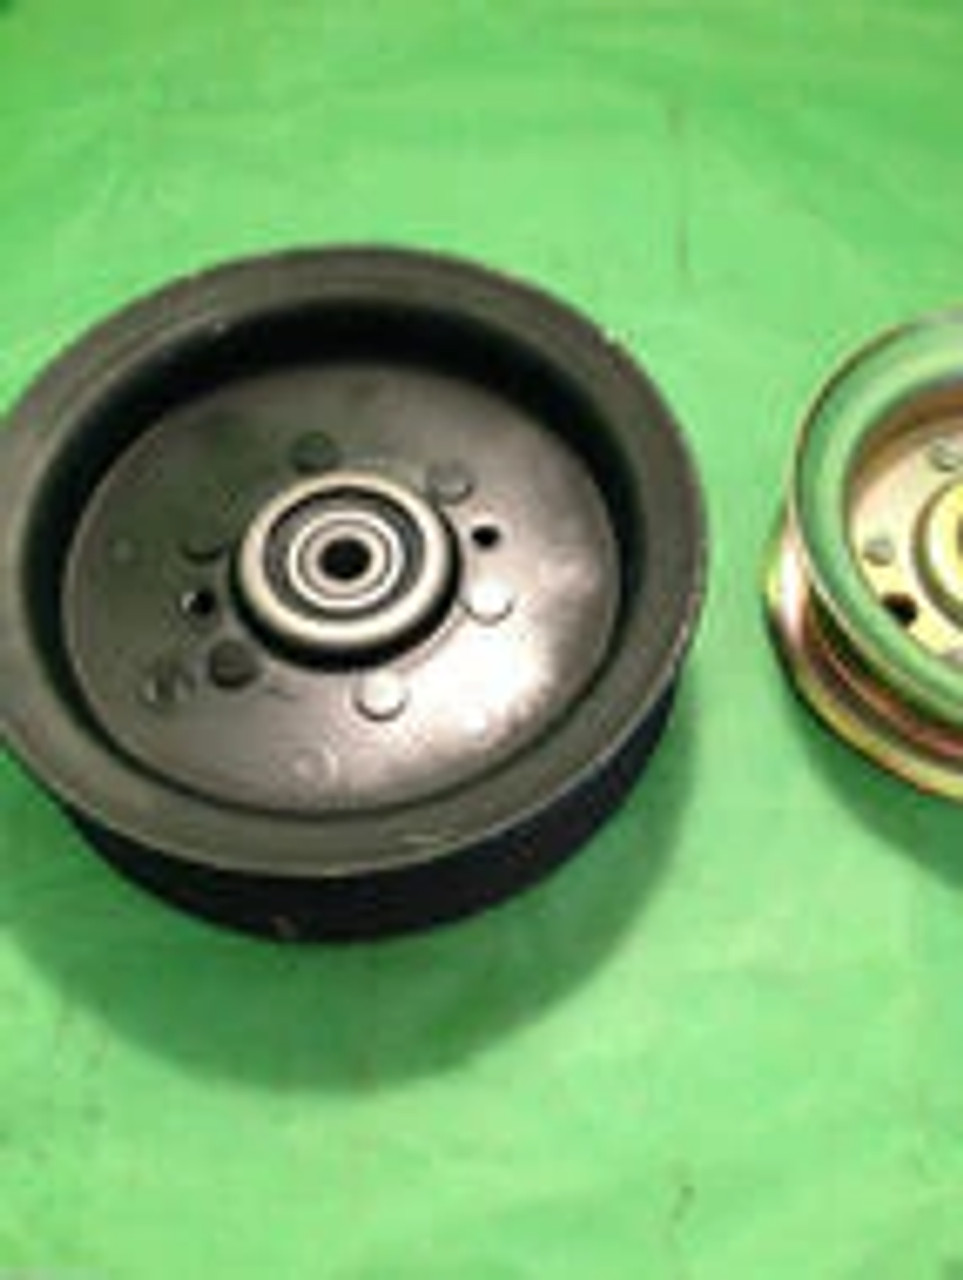 Mower Deck Idler Pulley Set Replaces 196106 532196106 177968 197379